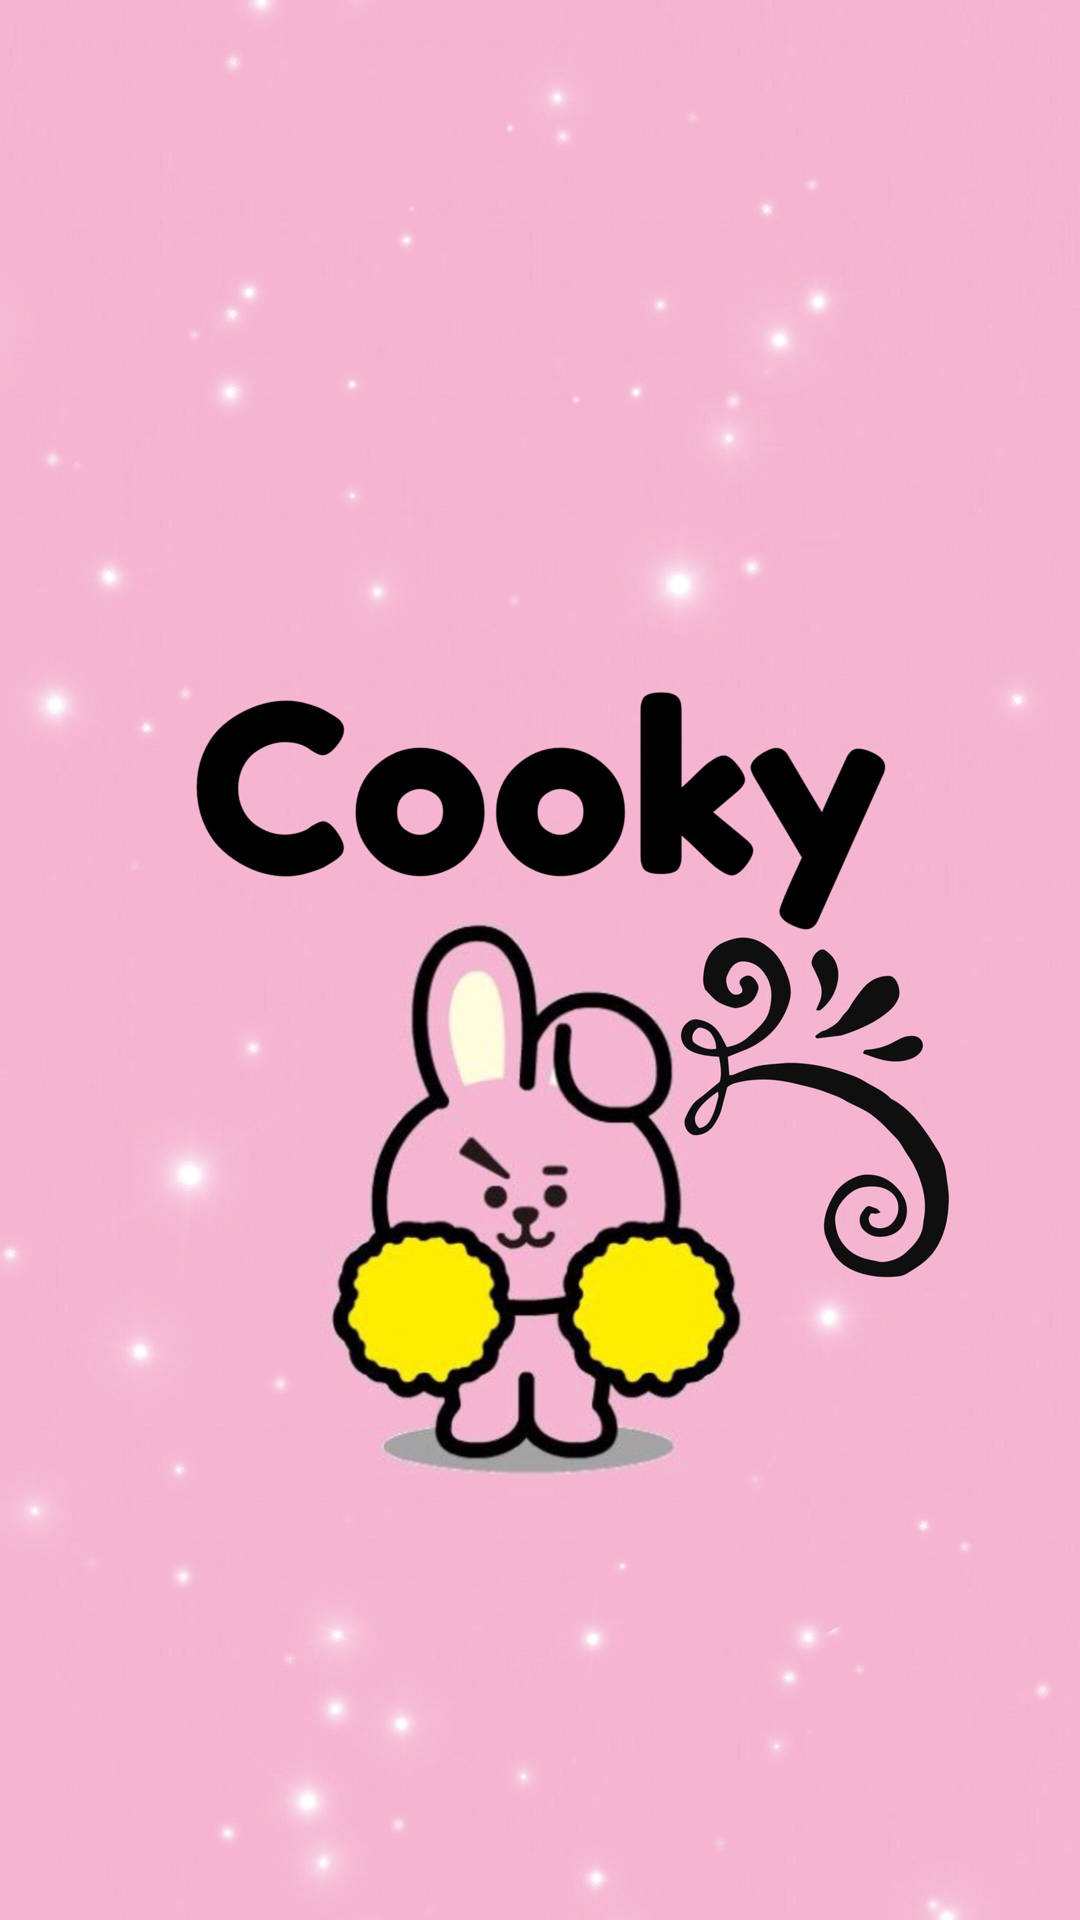 Adorable Cooky Bt21 Character Showing Off His Strong And Cute Side.